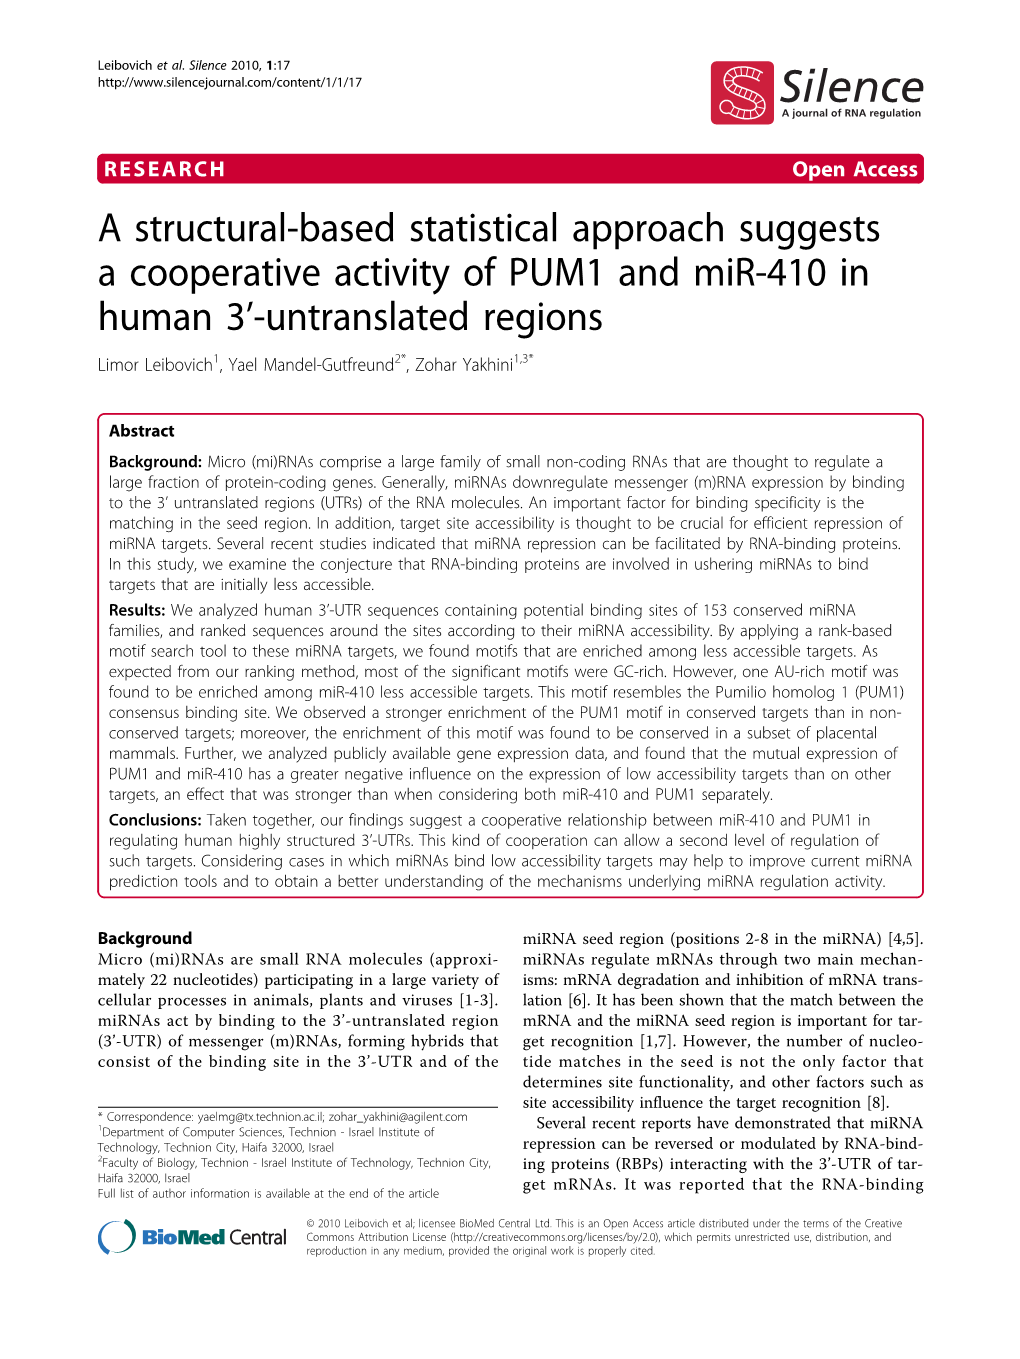 A Structural-Based Statistical Approach Suggests a Cooperative Activity Of